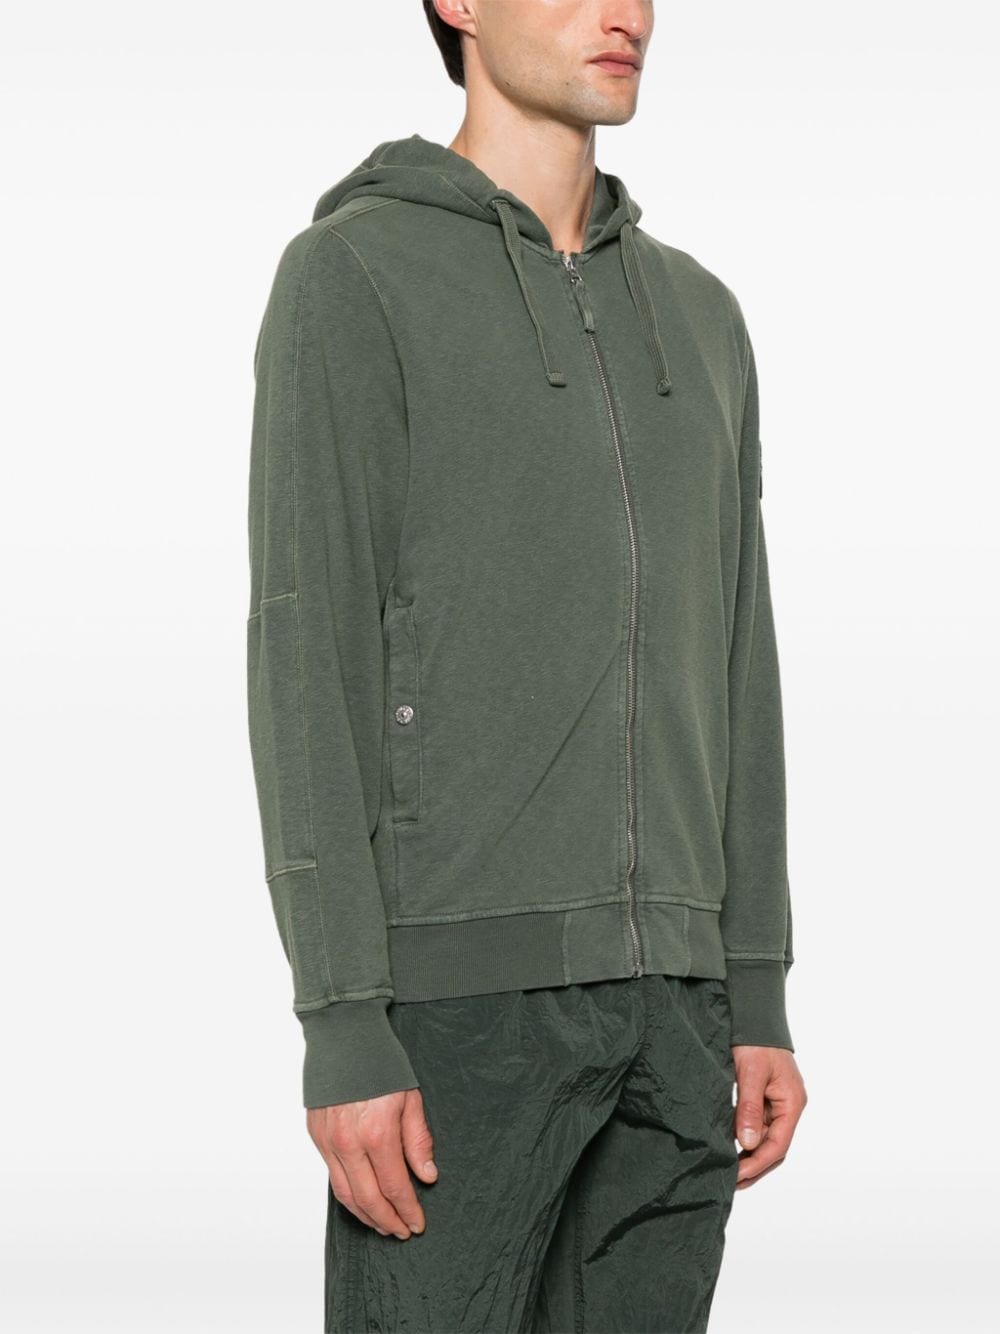 Compass-badge zipped hoodie<BR/><BR/><BR/>